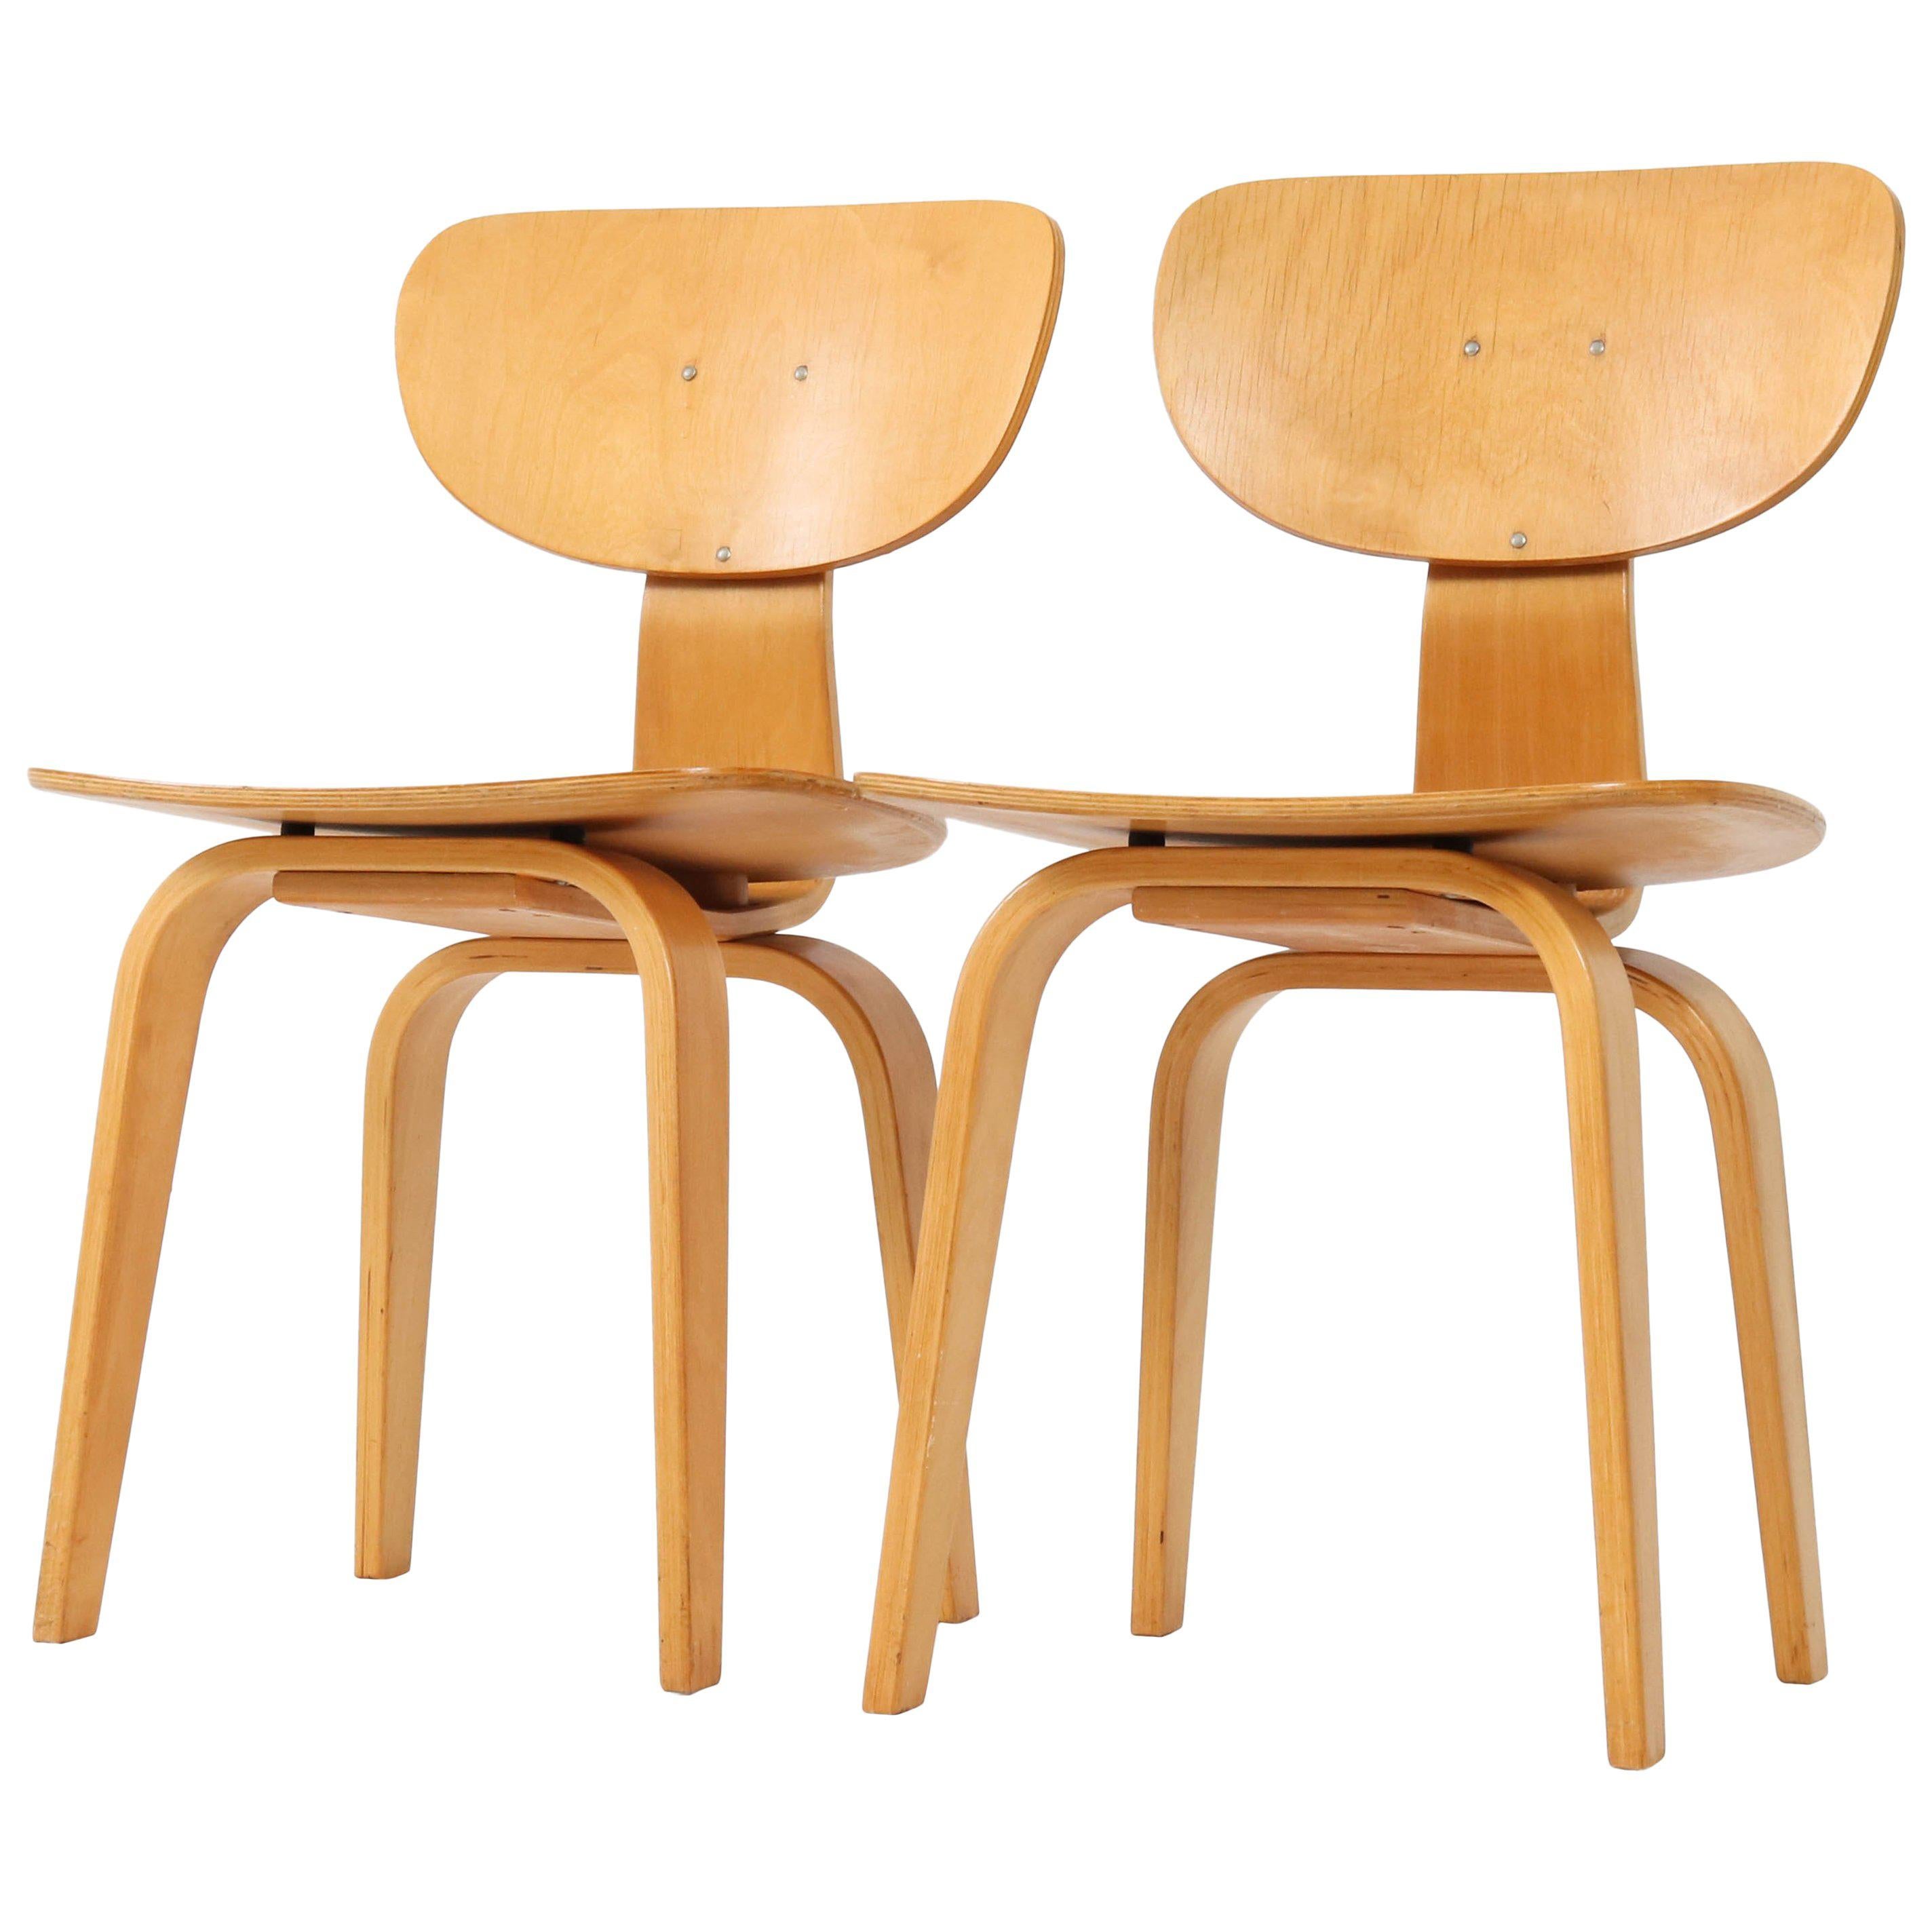 Pair of Mid-Century Modern SB02 Combex Series Chairs by Cees Braakman for Pastoe